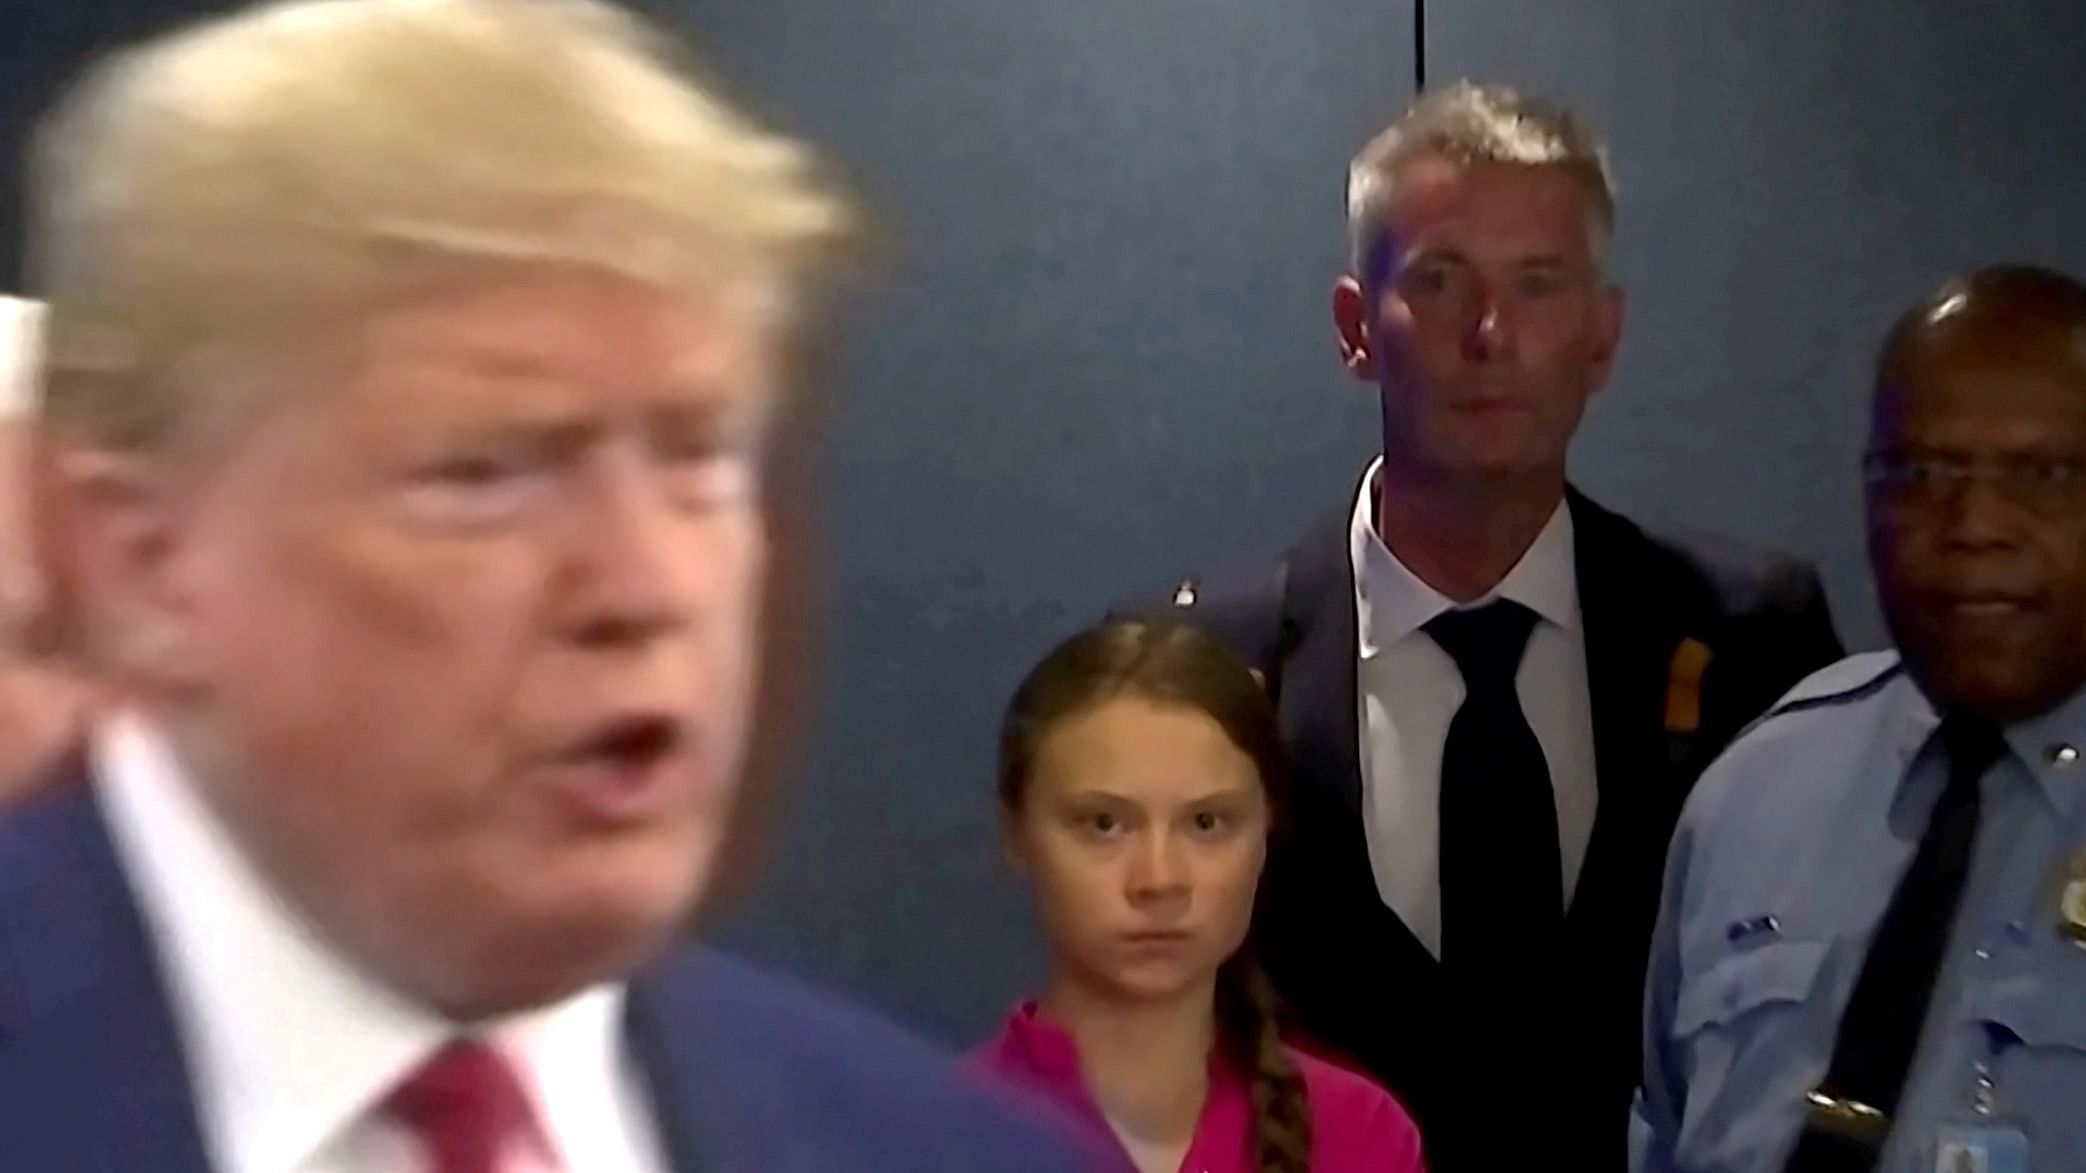 Swedish environmental activist Greta Thunberg watches as U.S. President Donald Trump enters the United Nations to speak with reporters in a still image from video taken in New York City, U.S. September 23, 2019. Credit: Reuters Photo